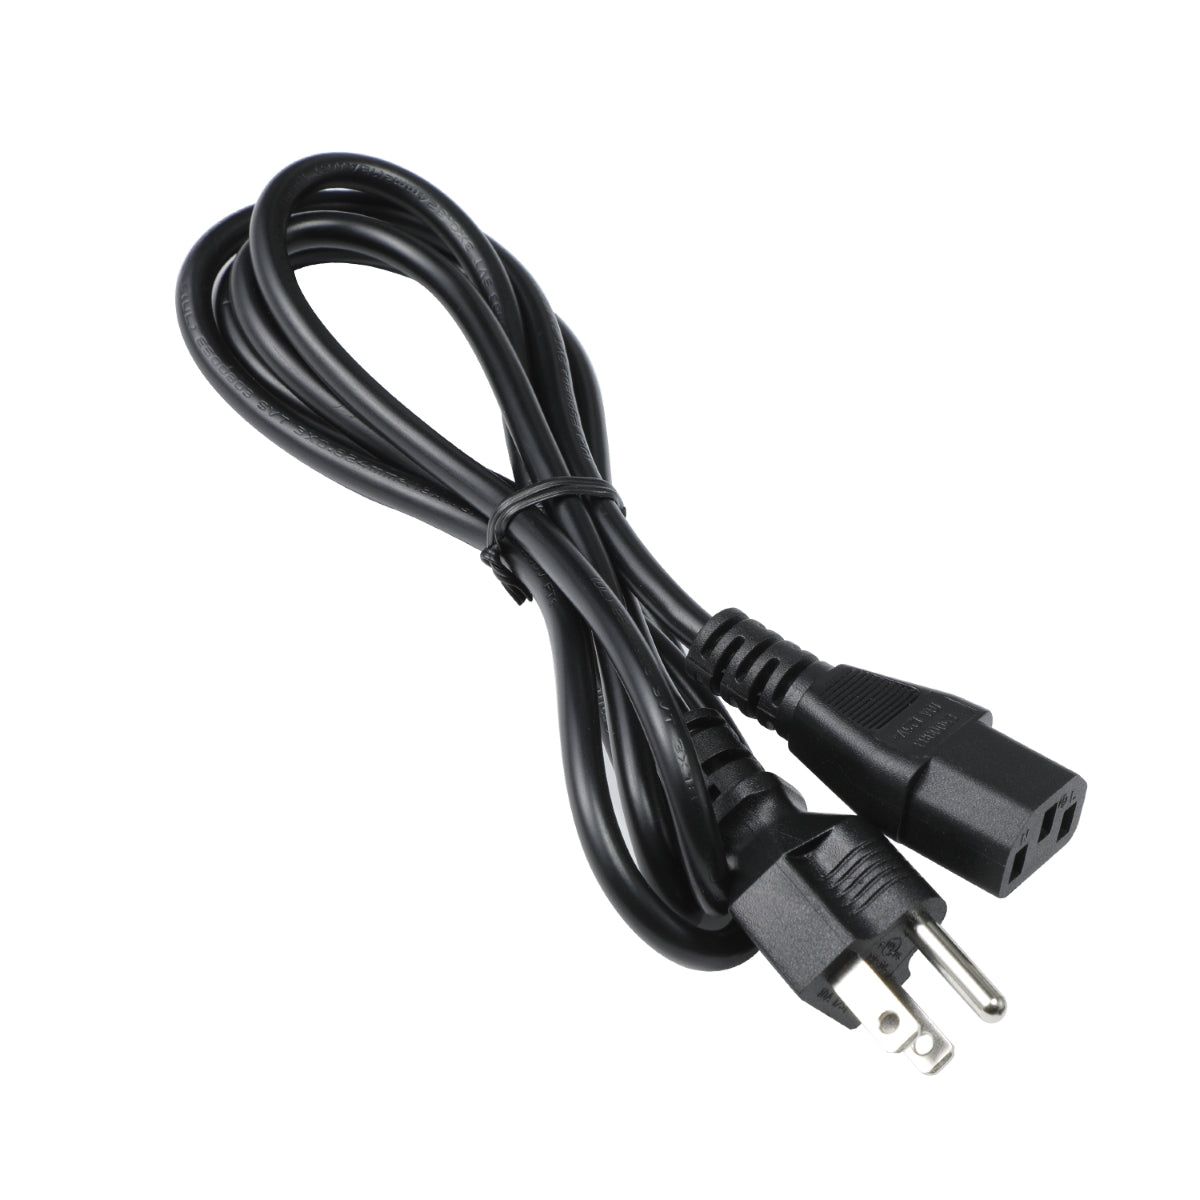 Power Cord for BenQ PD3200U IPS Monitor